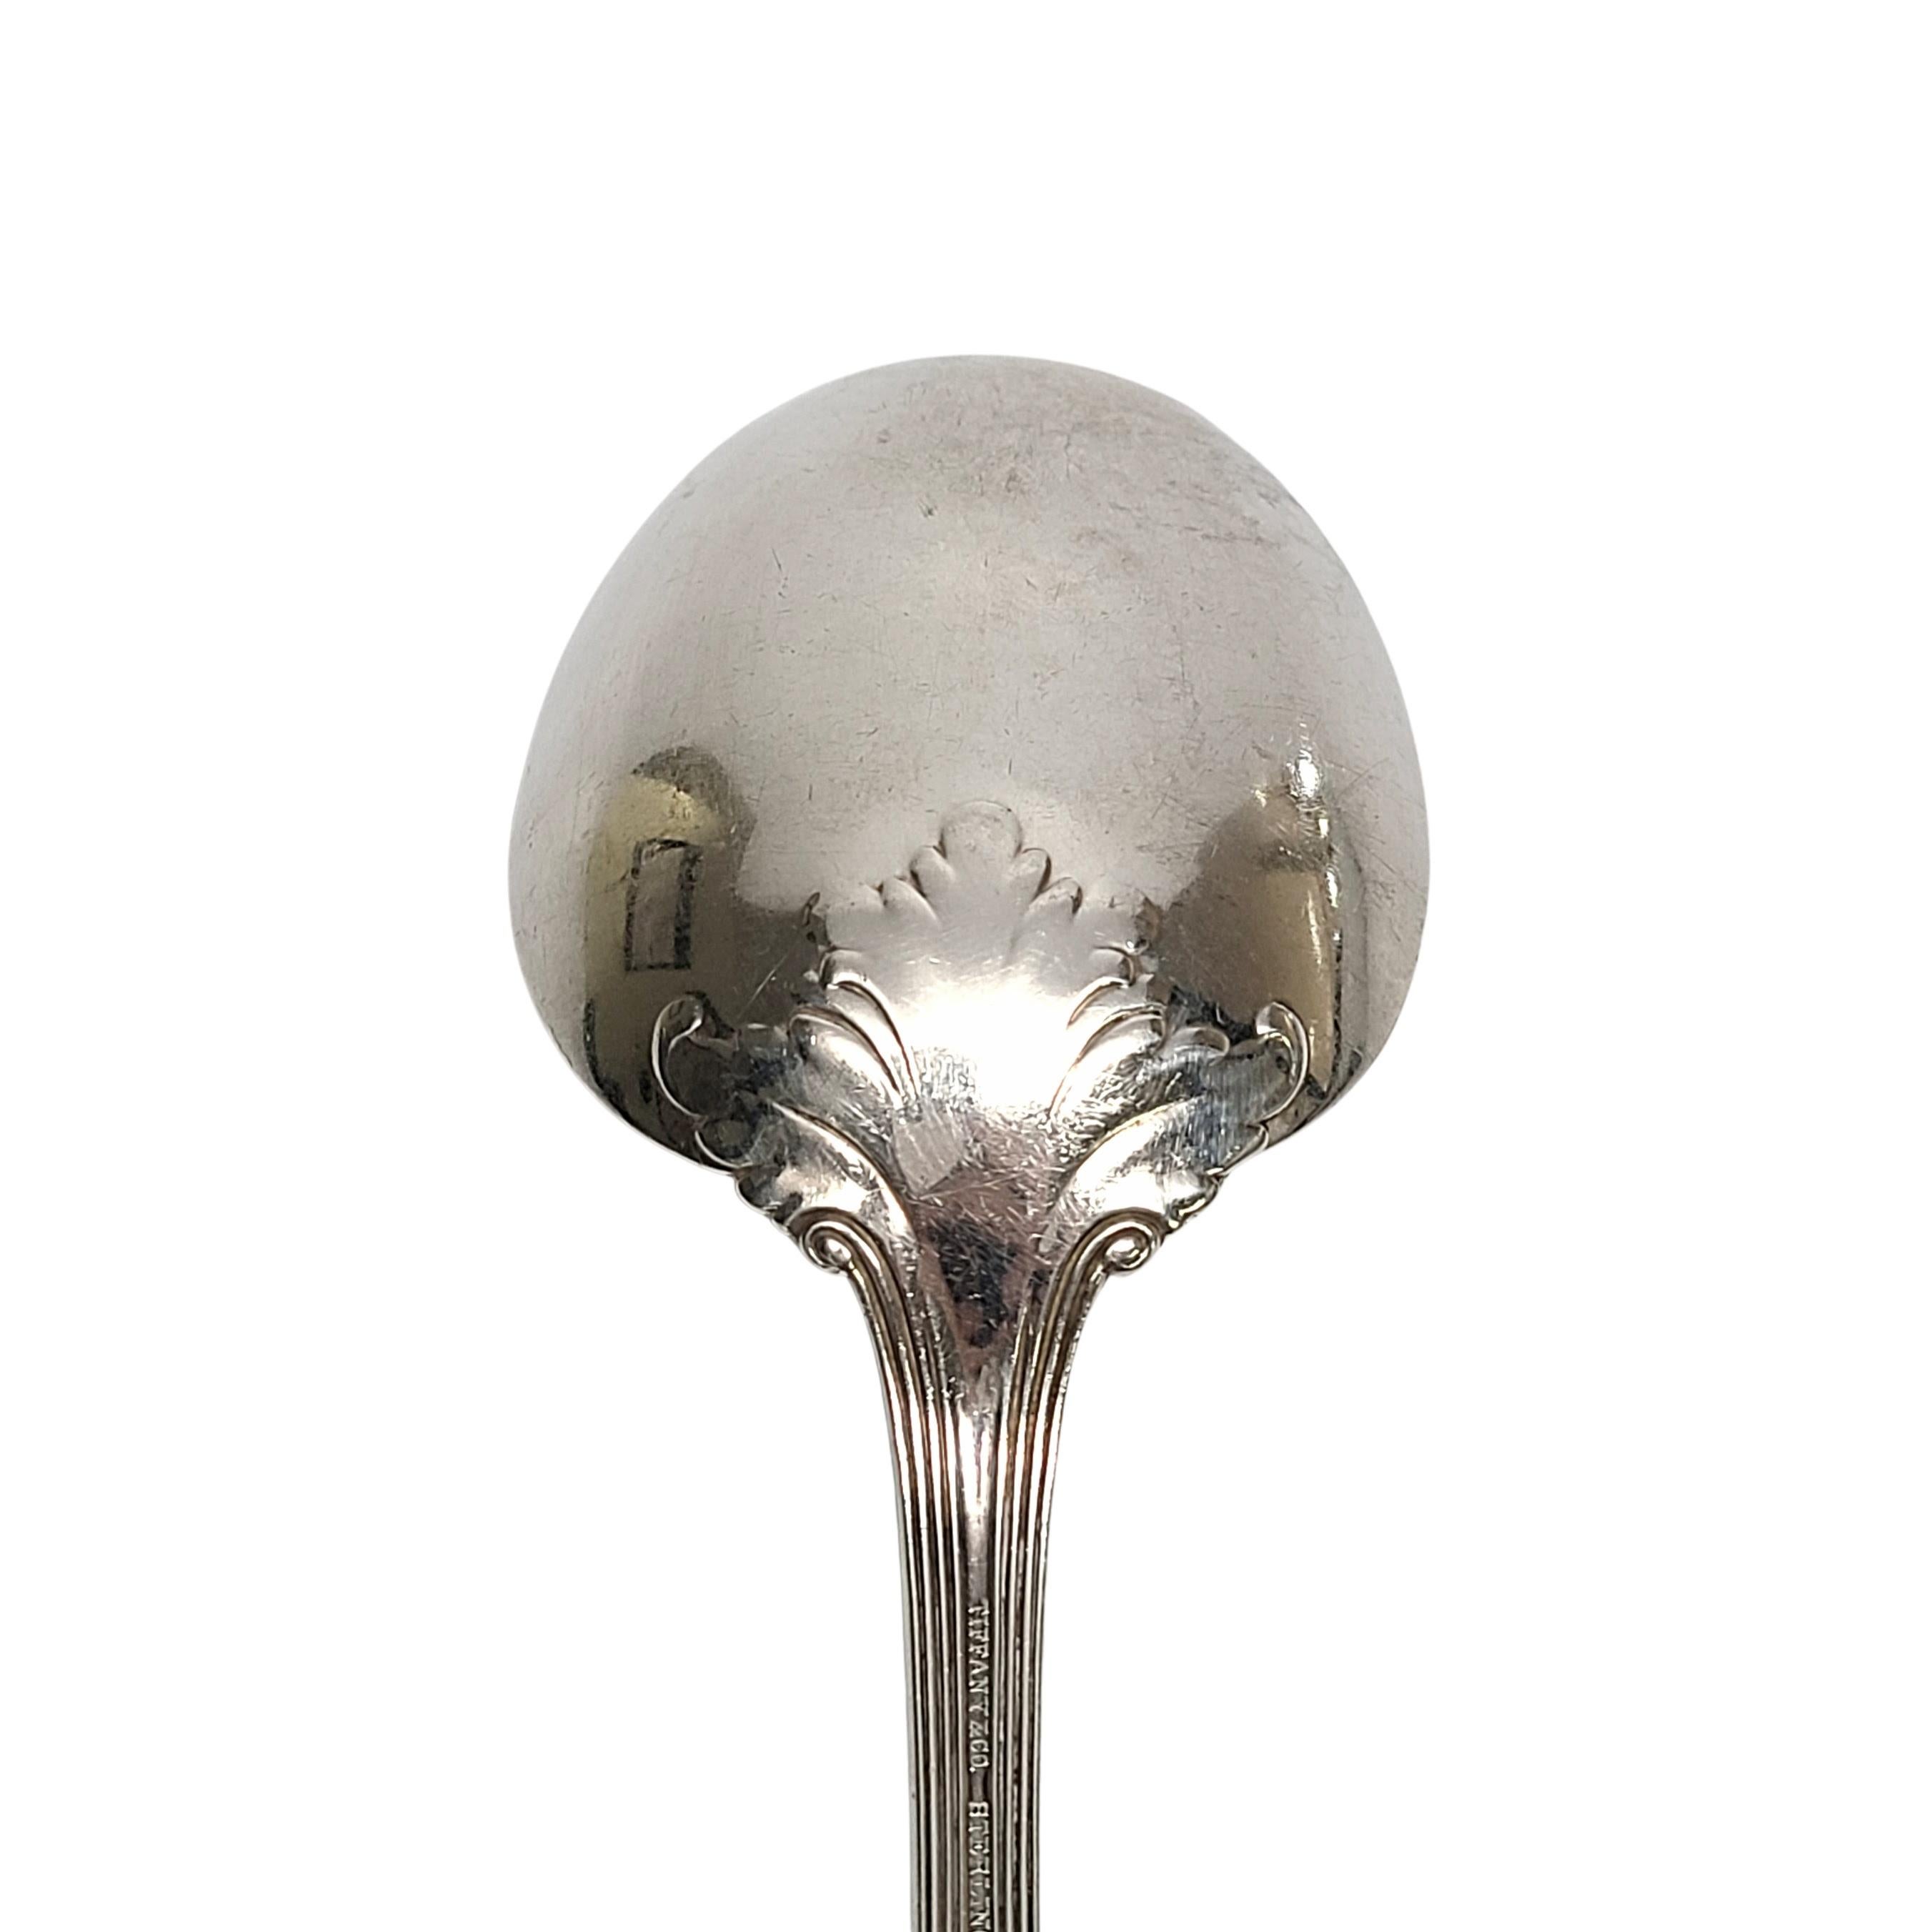 Women's or Men's Tiffany & Co. Sterling Silver Colonial Vegetable Serving Spoon with Monogram